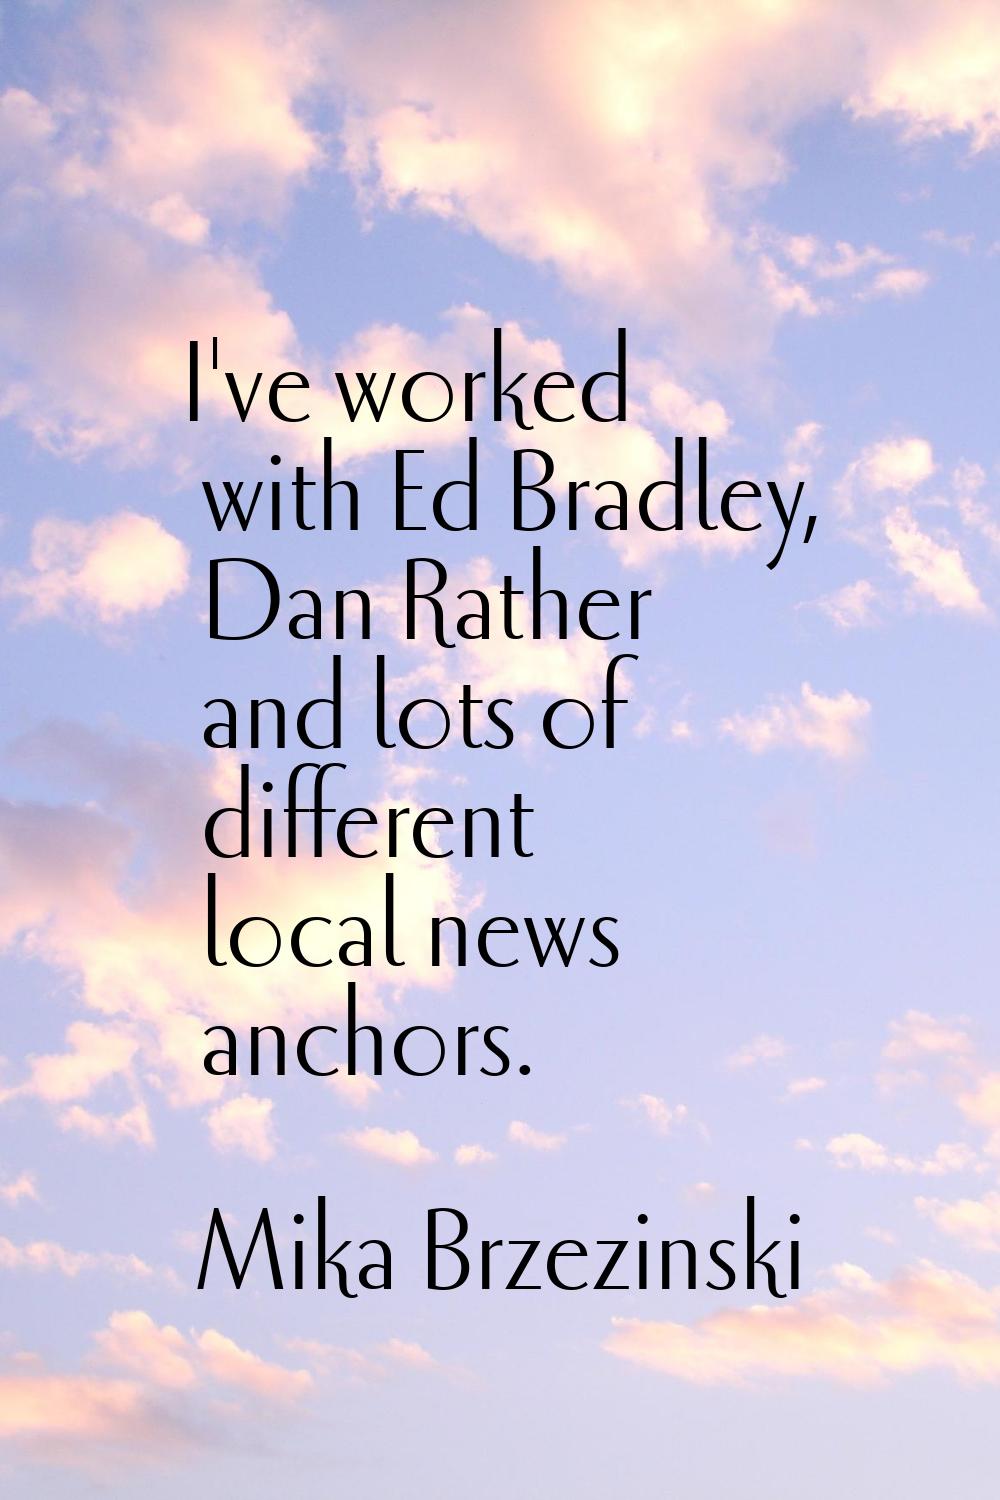 I've worked with Ed Bradley, Dan Rather and lots of different local news anchors.